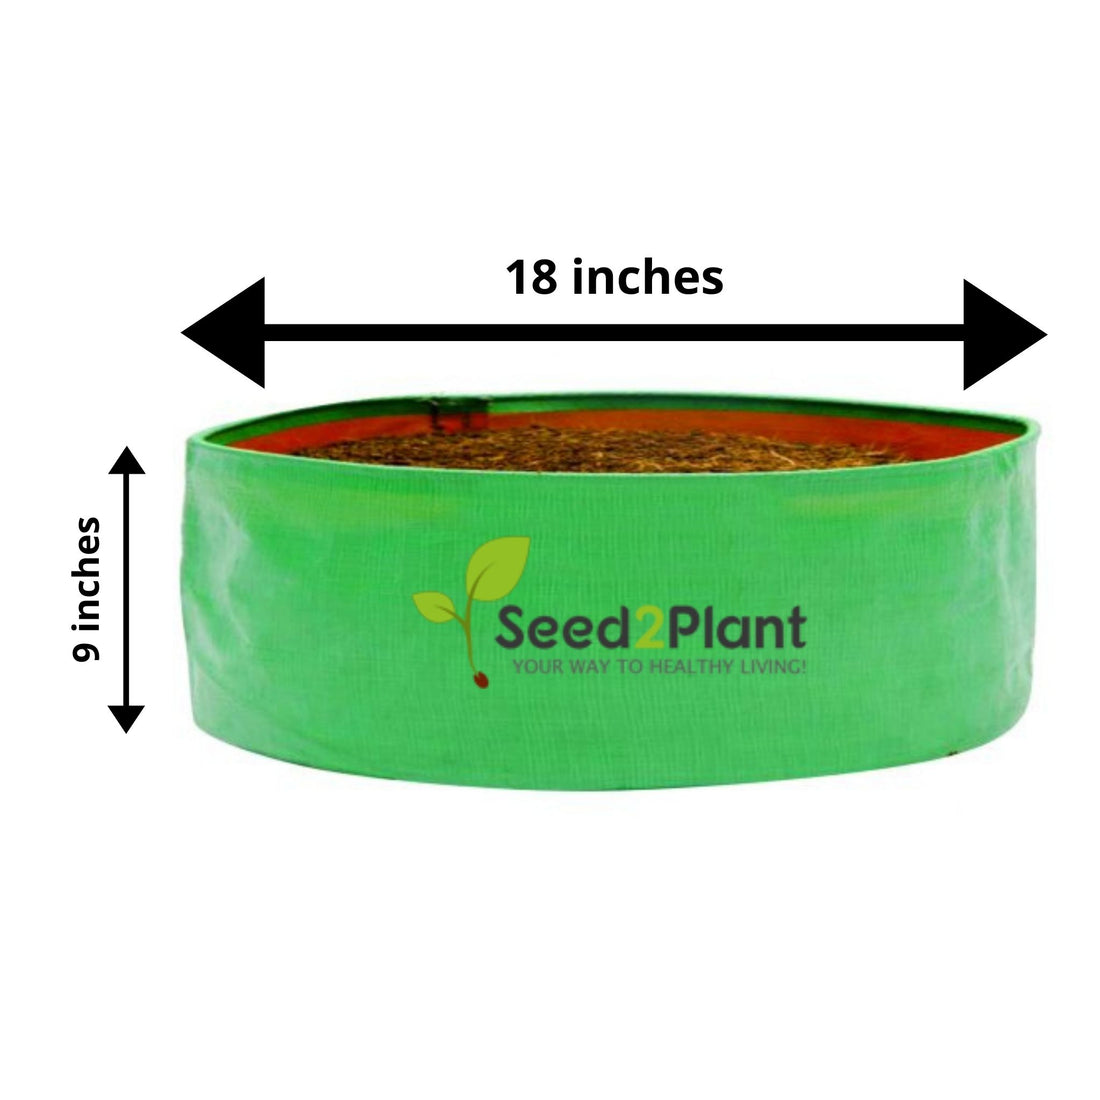 18x9 Inches (1½x¾ Ft) (Pack of 10) - 220 GSM HDPE Round Spinach Grow Bag